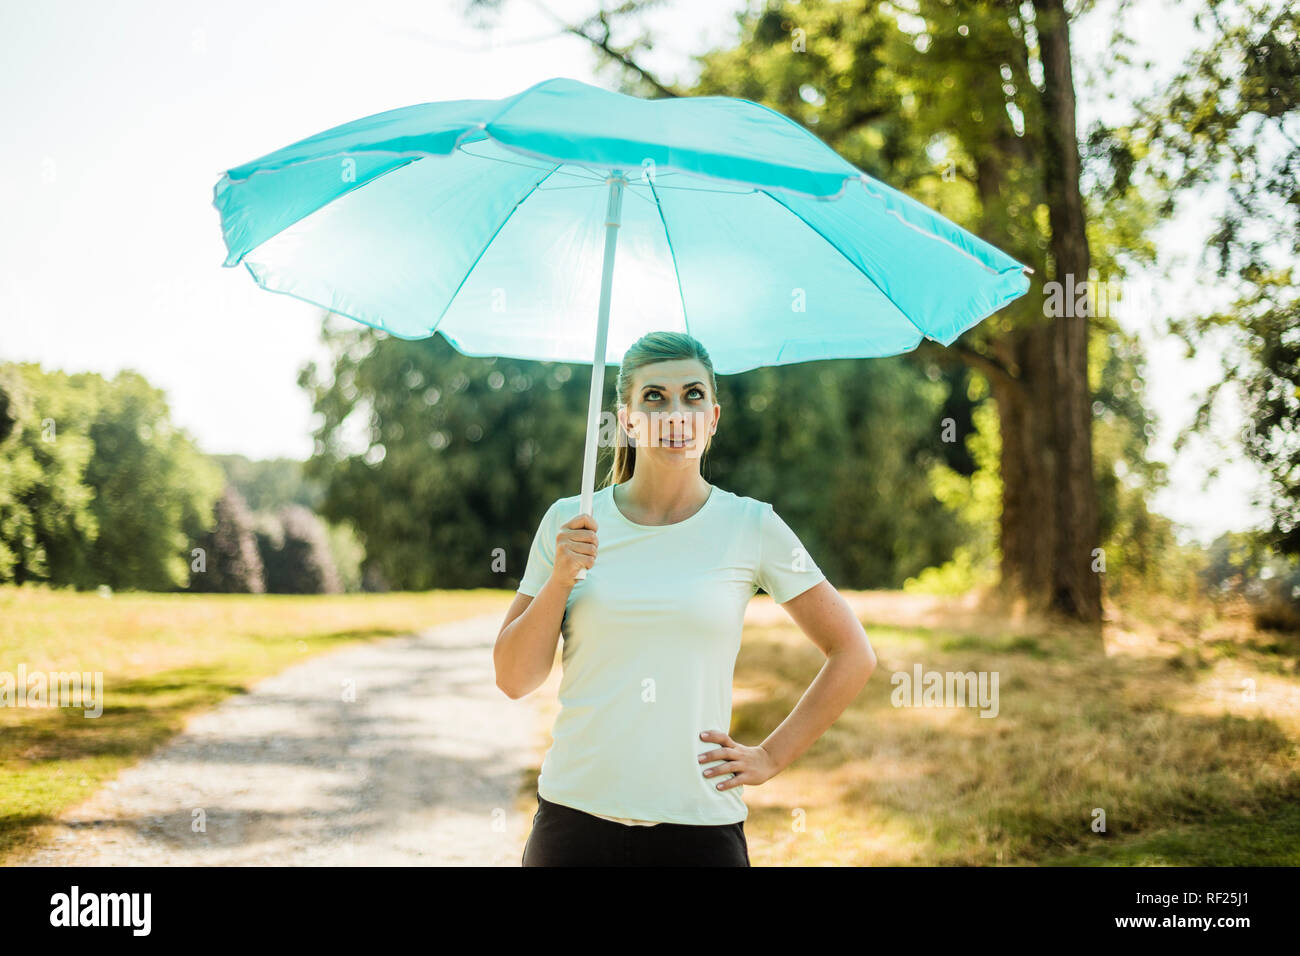 Sportive young woman standing in a park holding sunshade Stock Photo